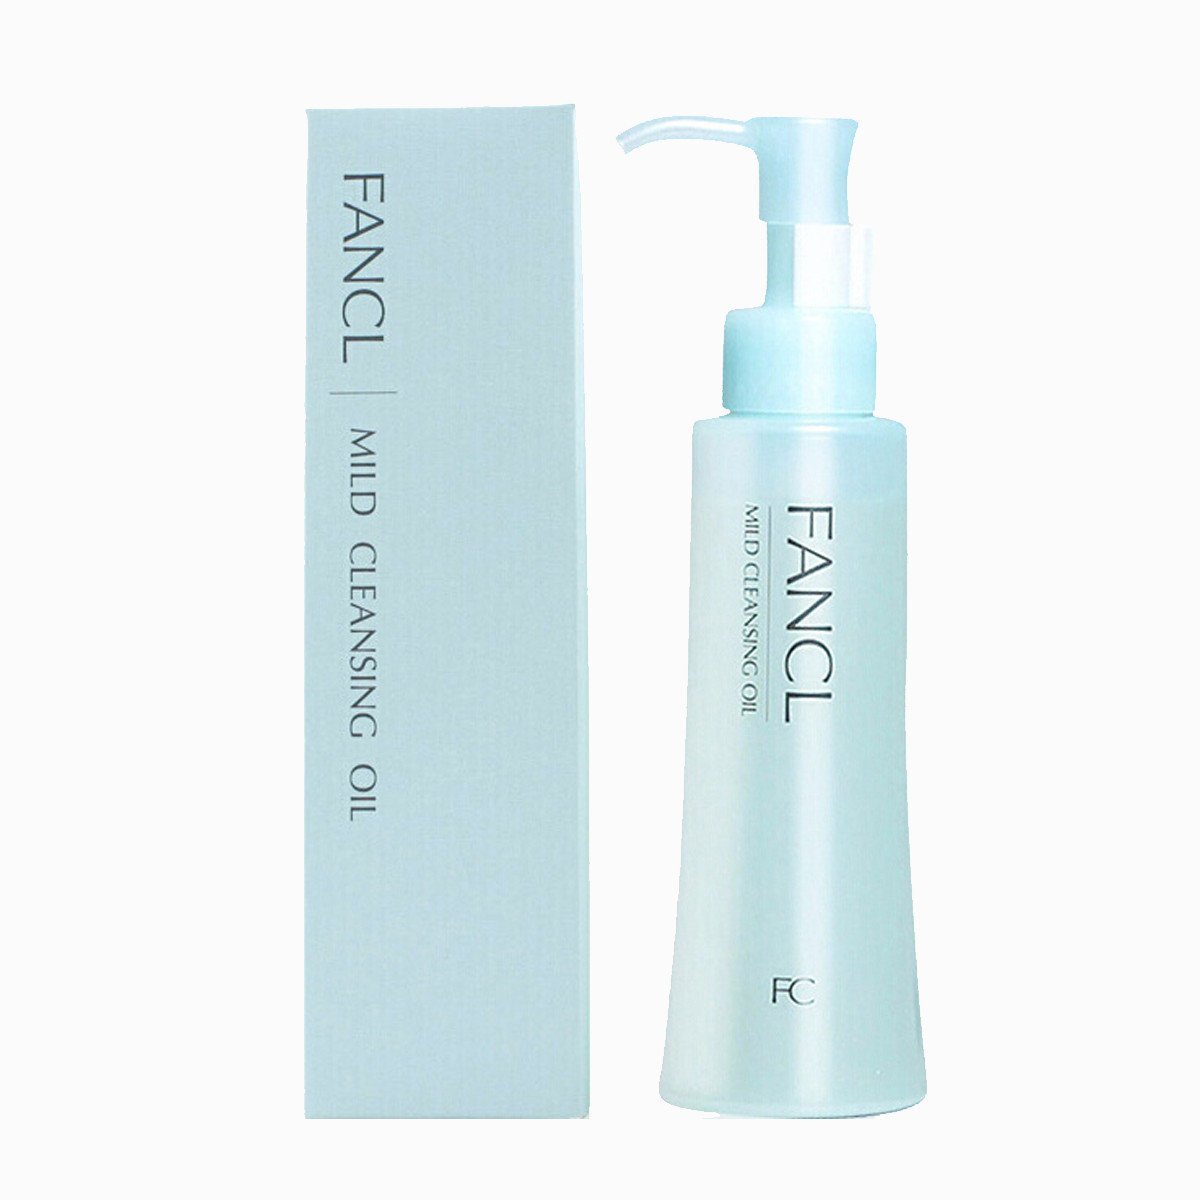 Fancl Mild Cleansing Oil 120ml (Counter Ver.)